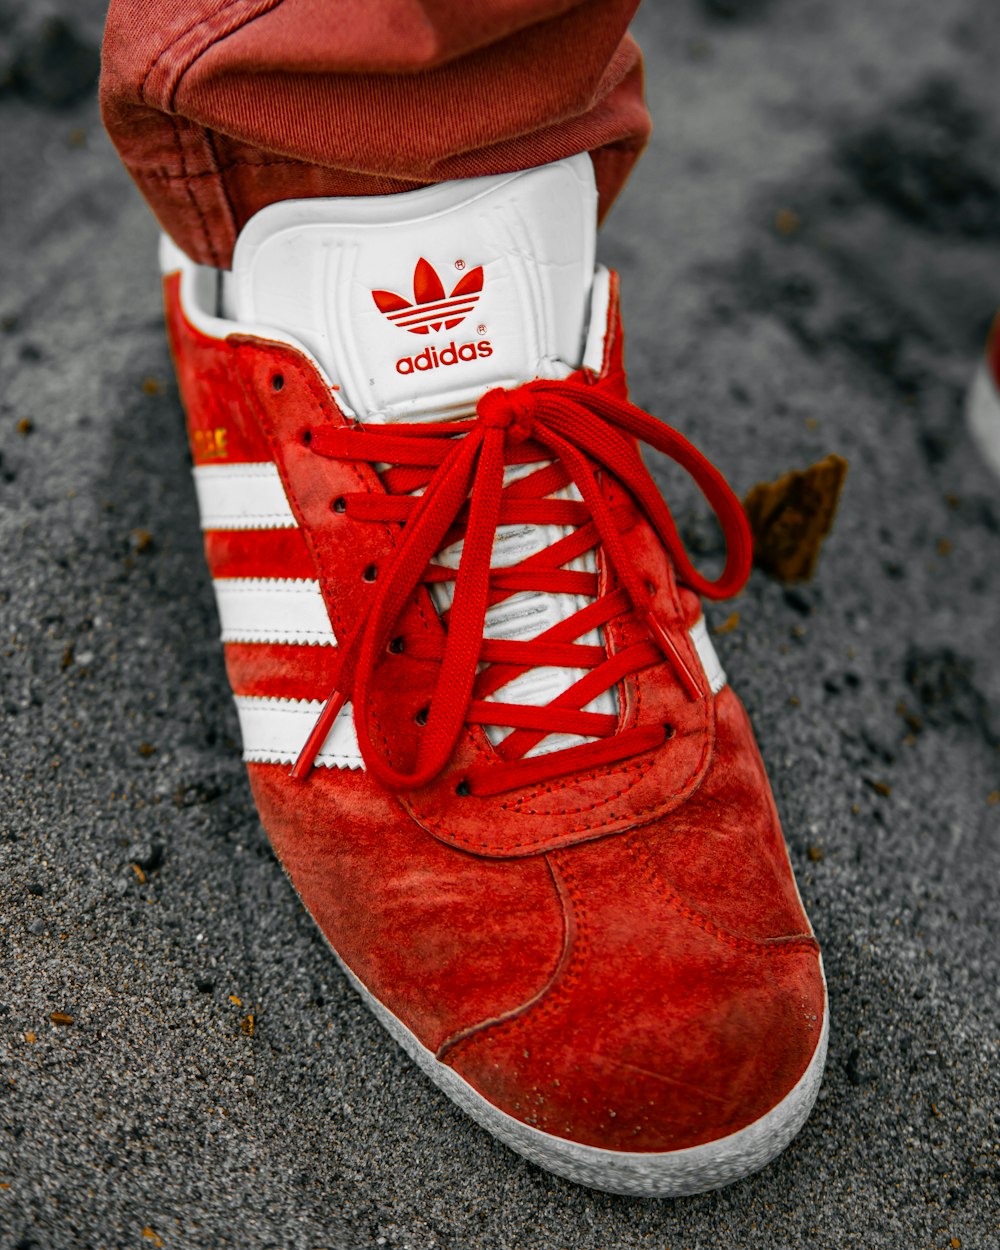 a close up of a person's red adidas sneakers